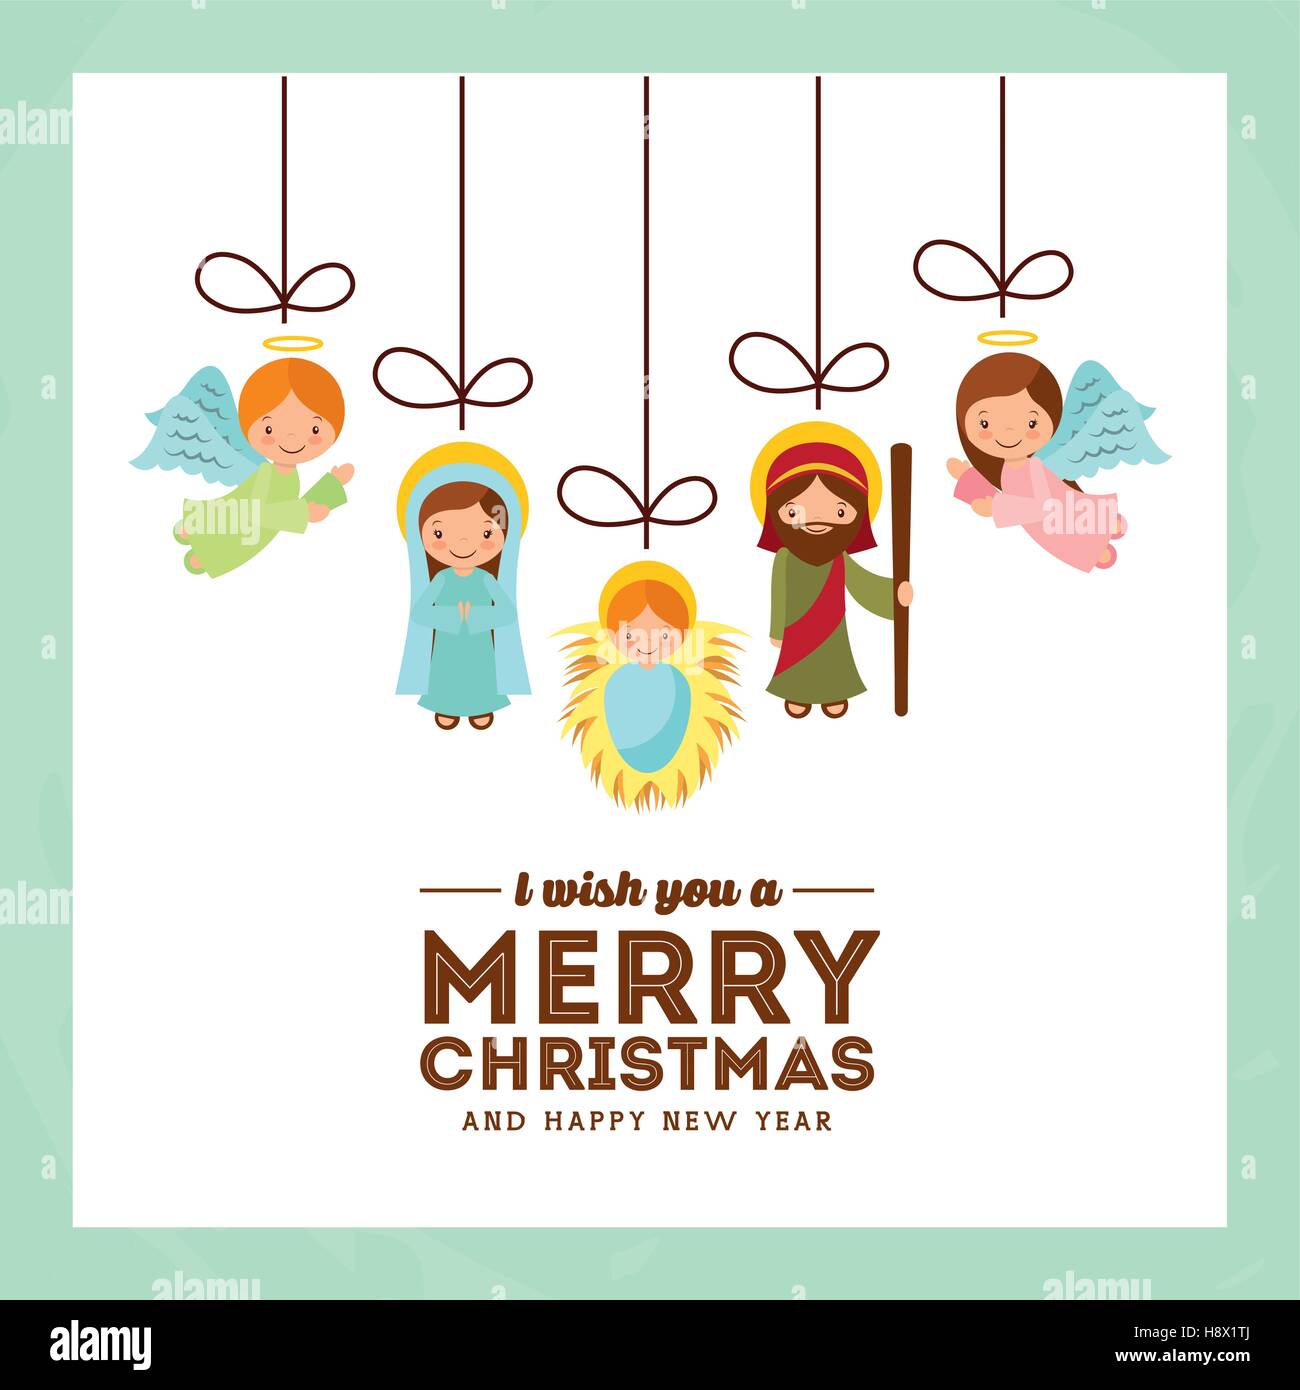 holy family manger scene merry christmas and happy new year card colorful design vector